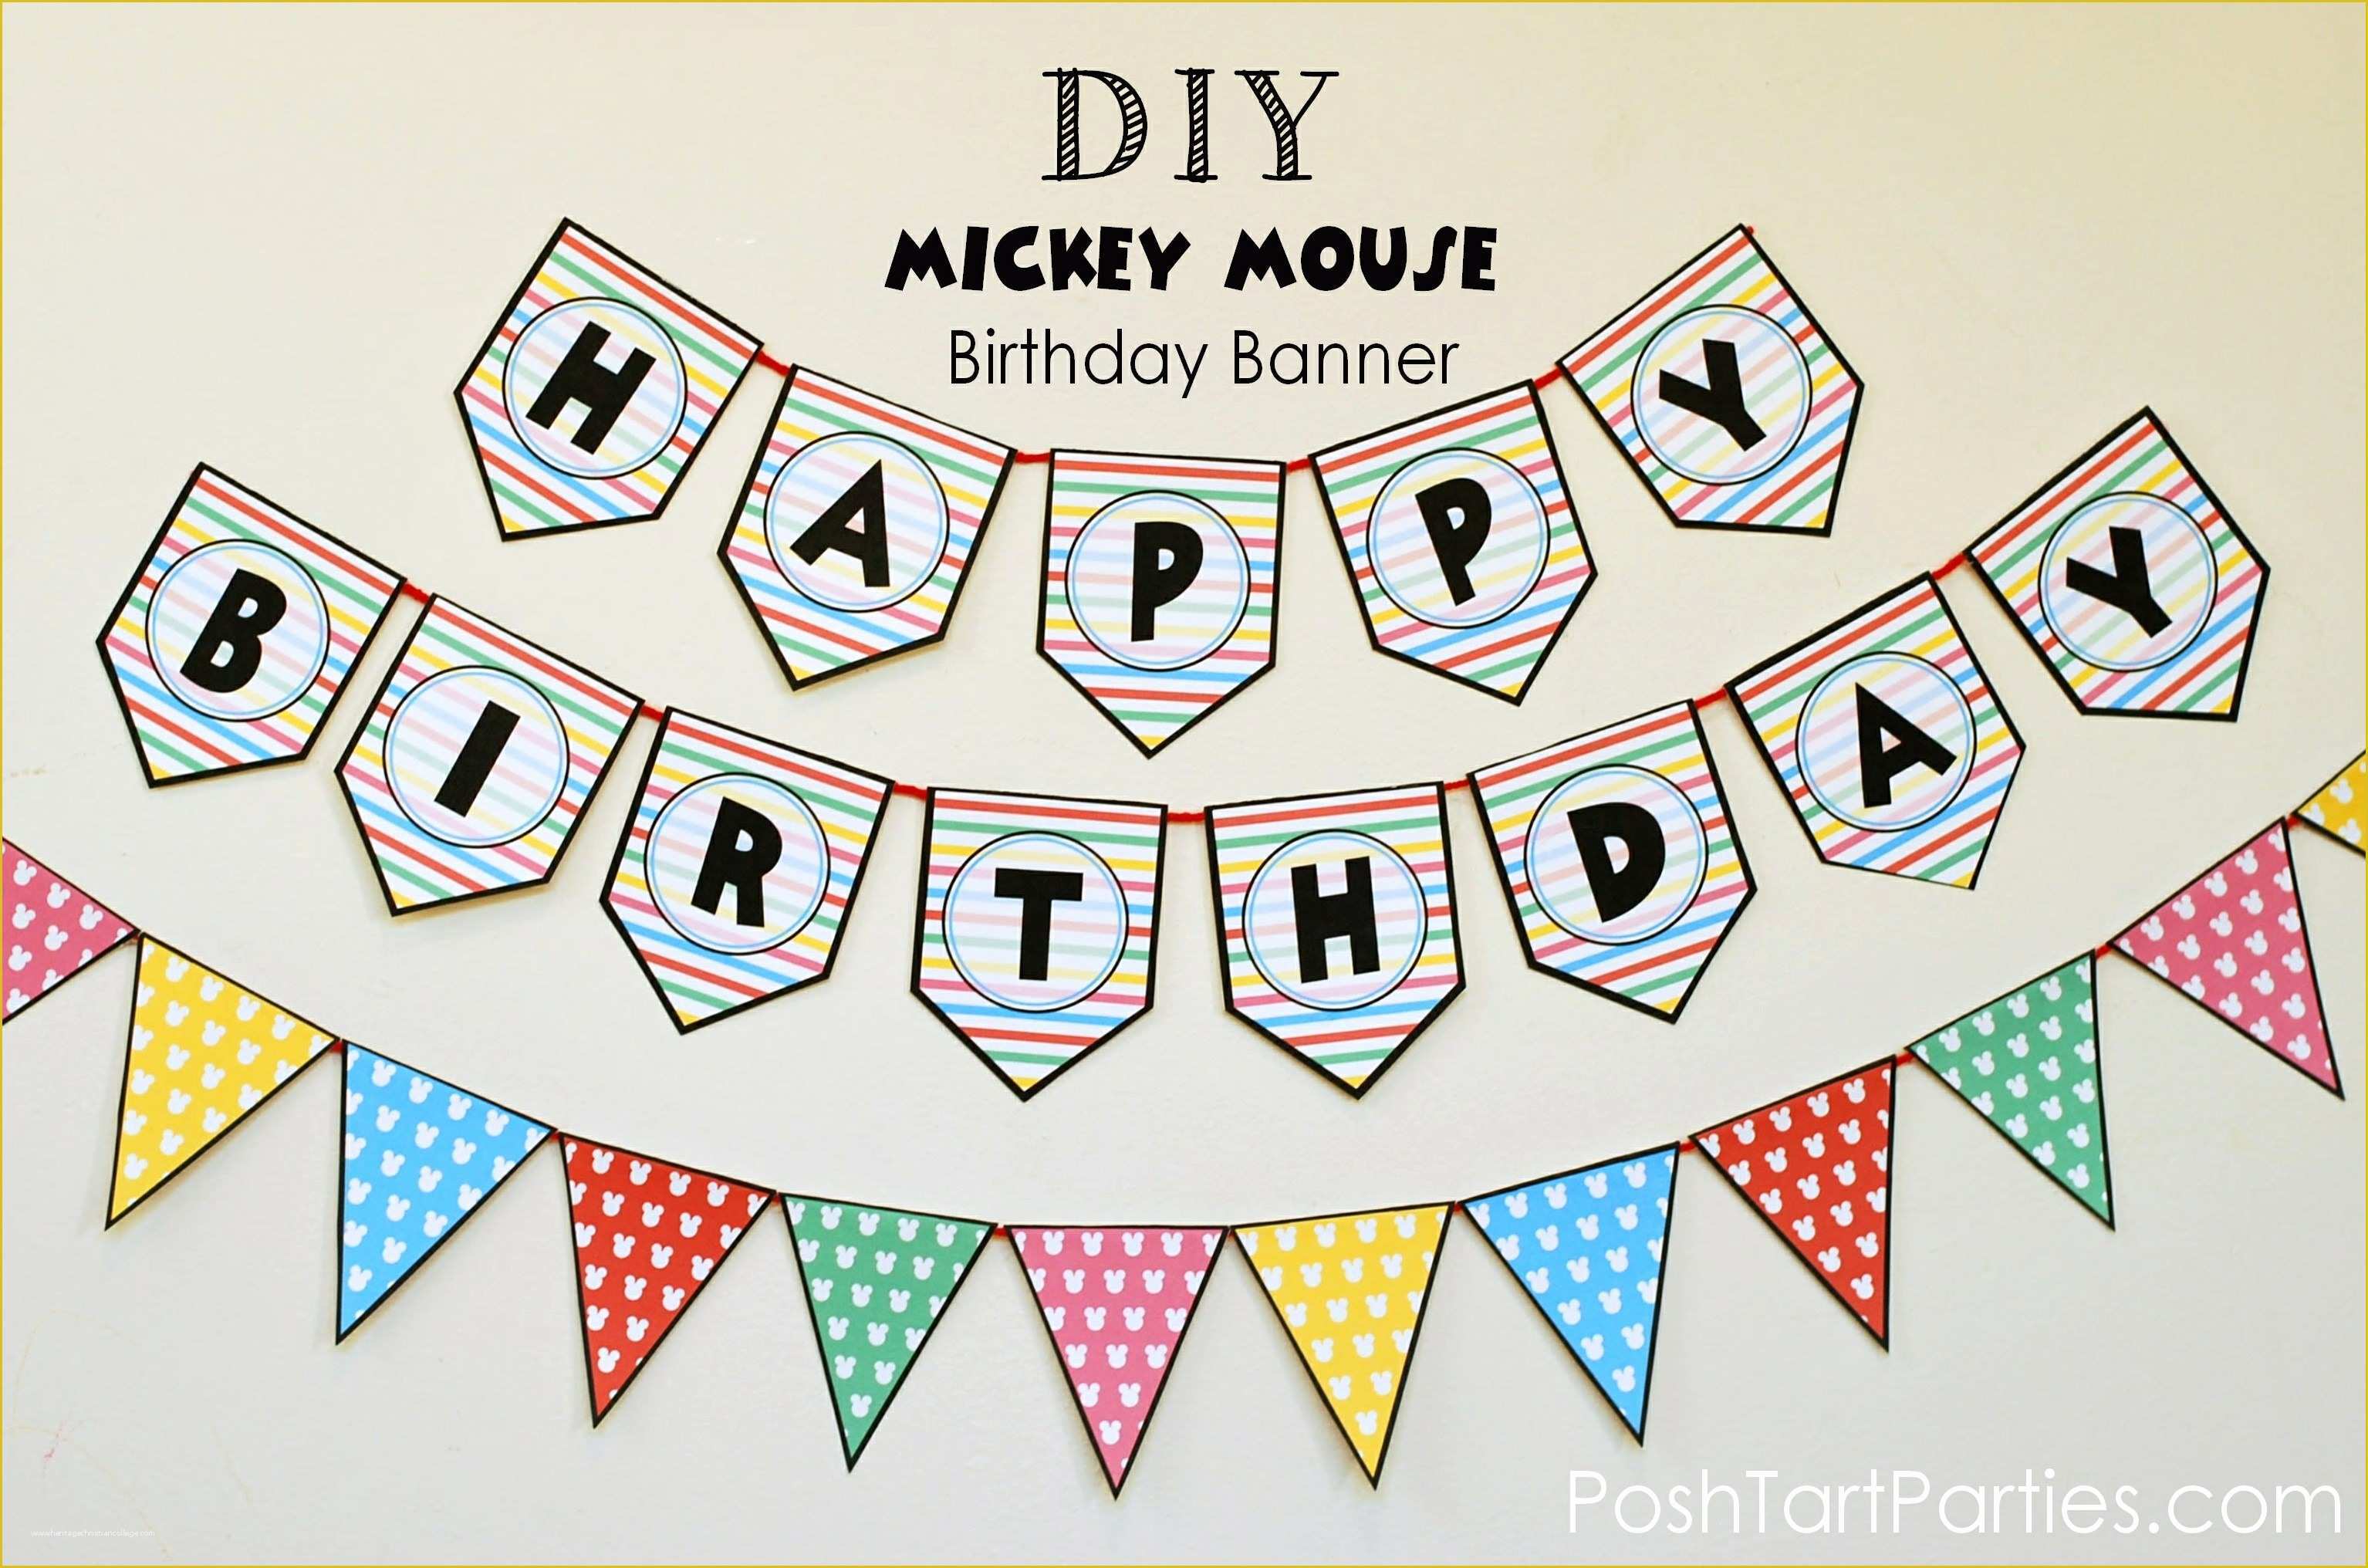 Happy Birthday Poster Template Free Of Free Printable Birthday Banners Personalized Printable